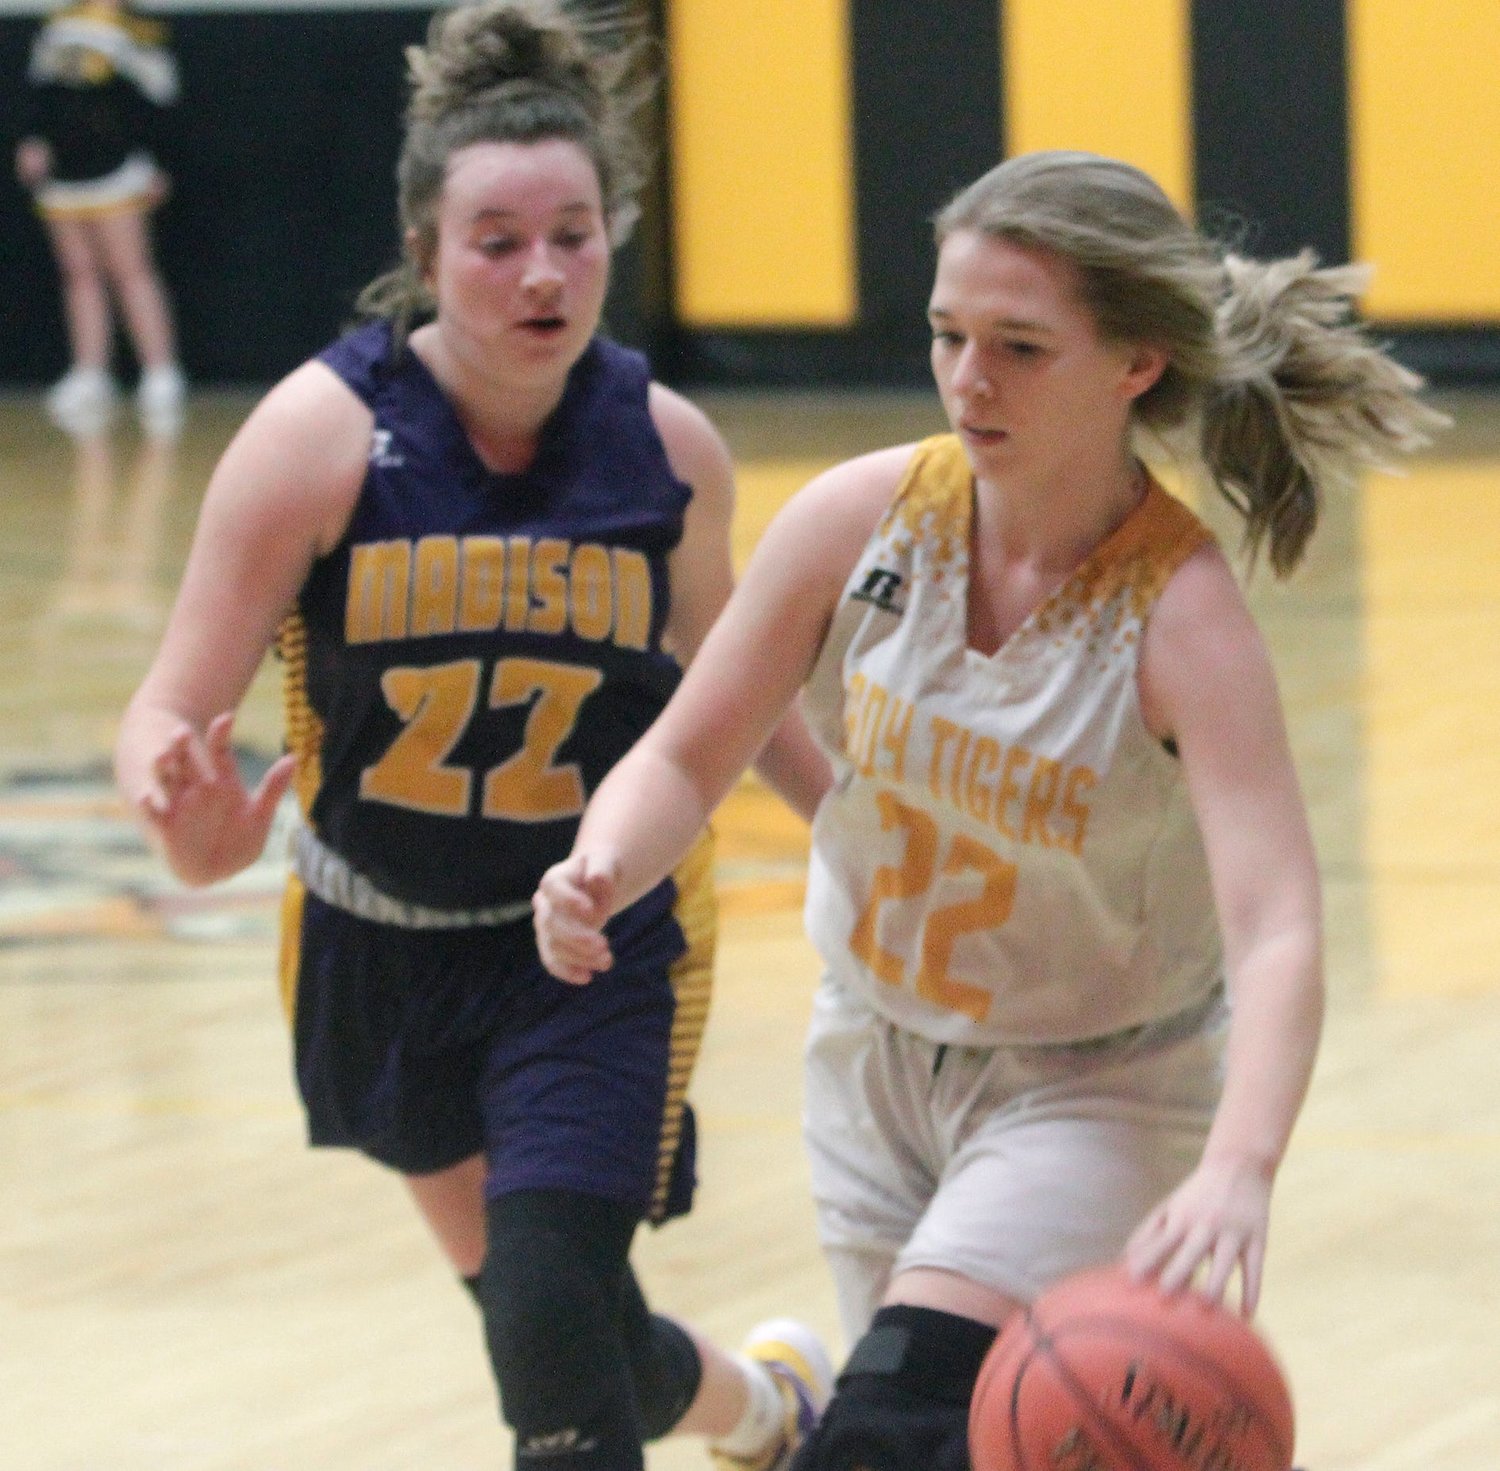 Higbee Lady Tigers junior guard Macey Whisenand dribbles past a Madison player during last Monday's opening round game of the Class 1 District 10 tournament that Higbee won. The Lady Tigers season ended Wednesday with a 69-23 loss to Community of Laddonia in the district semifinal. Whisenand led her team with six points scored.